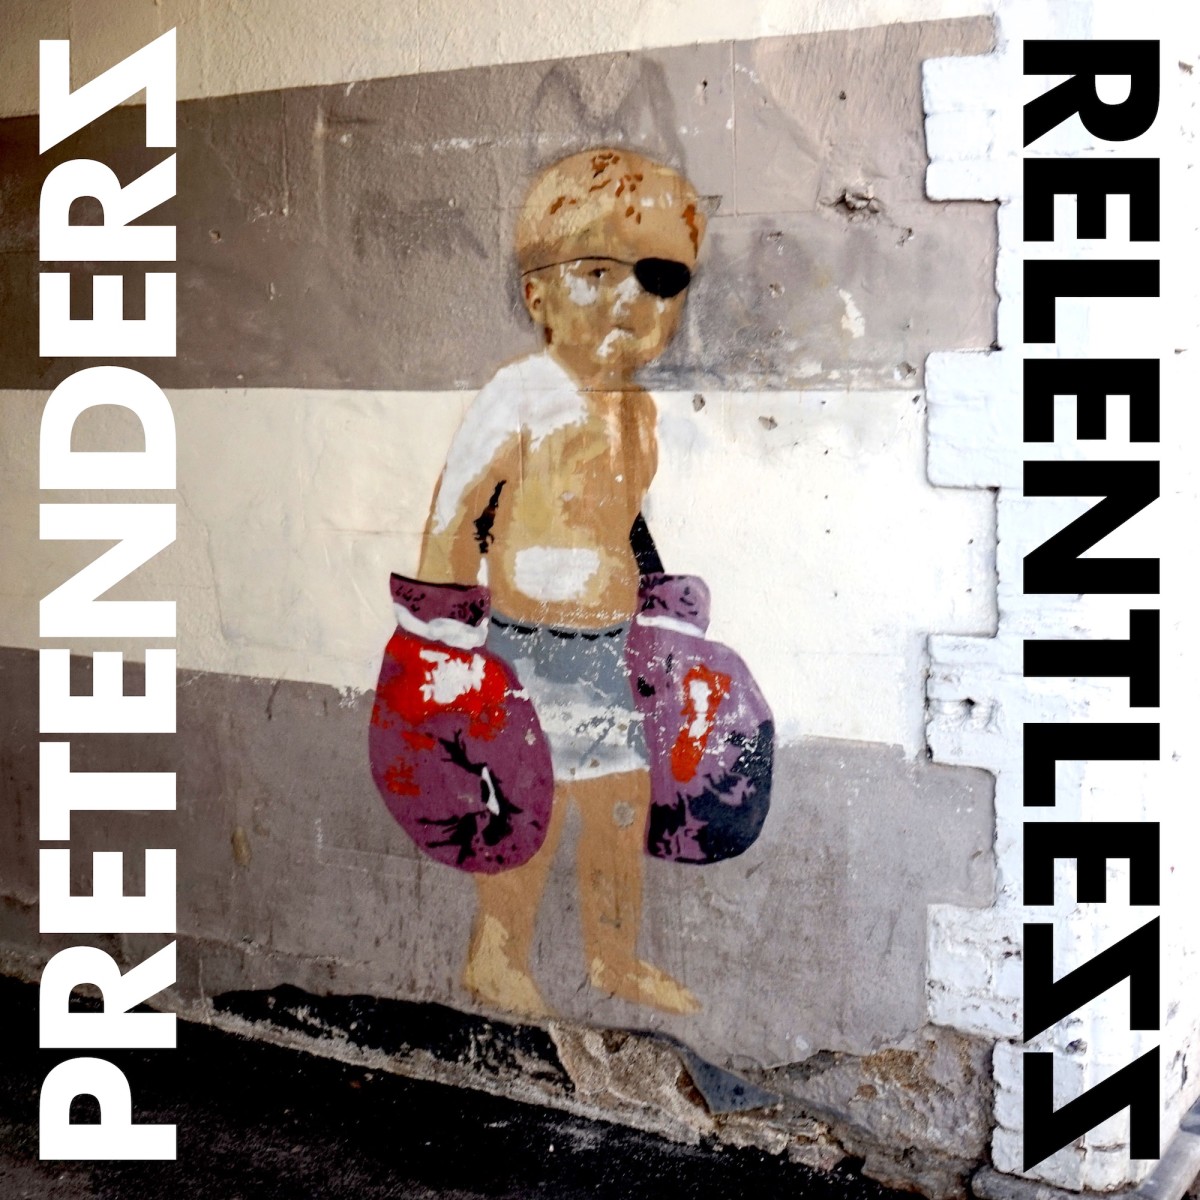 The Pretenders' Relentless has echoes of their classic work